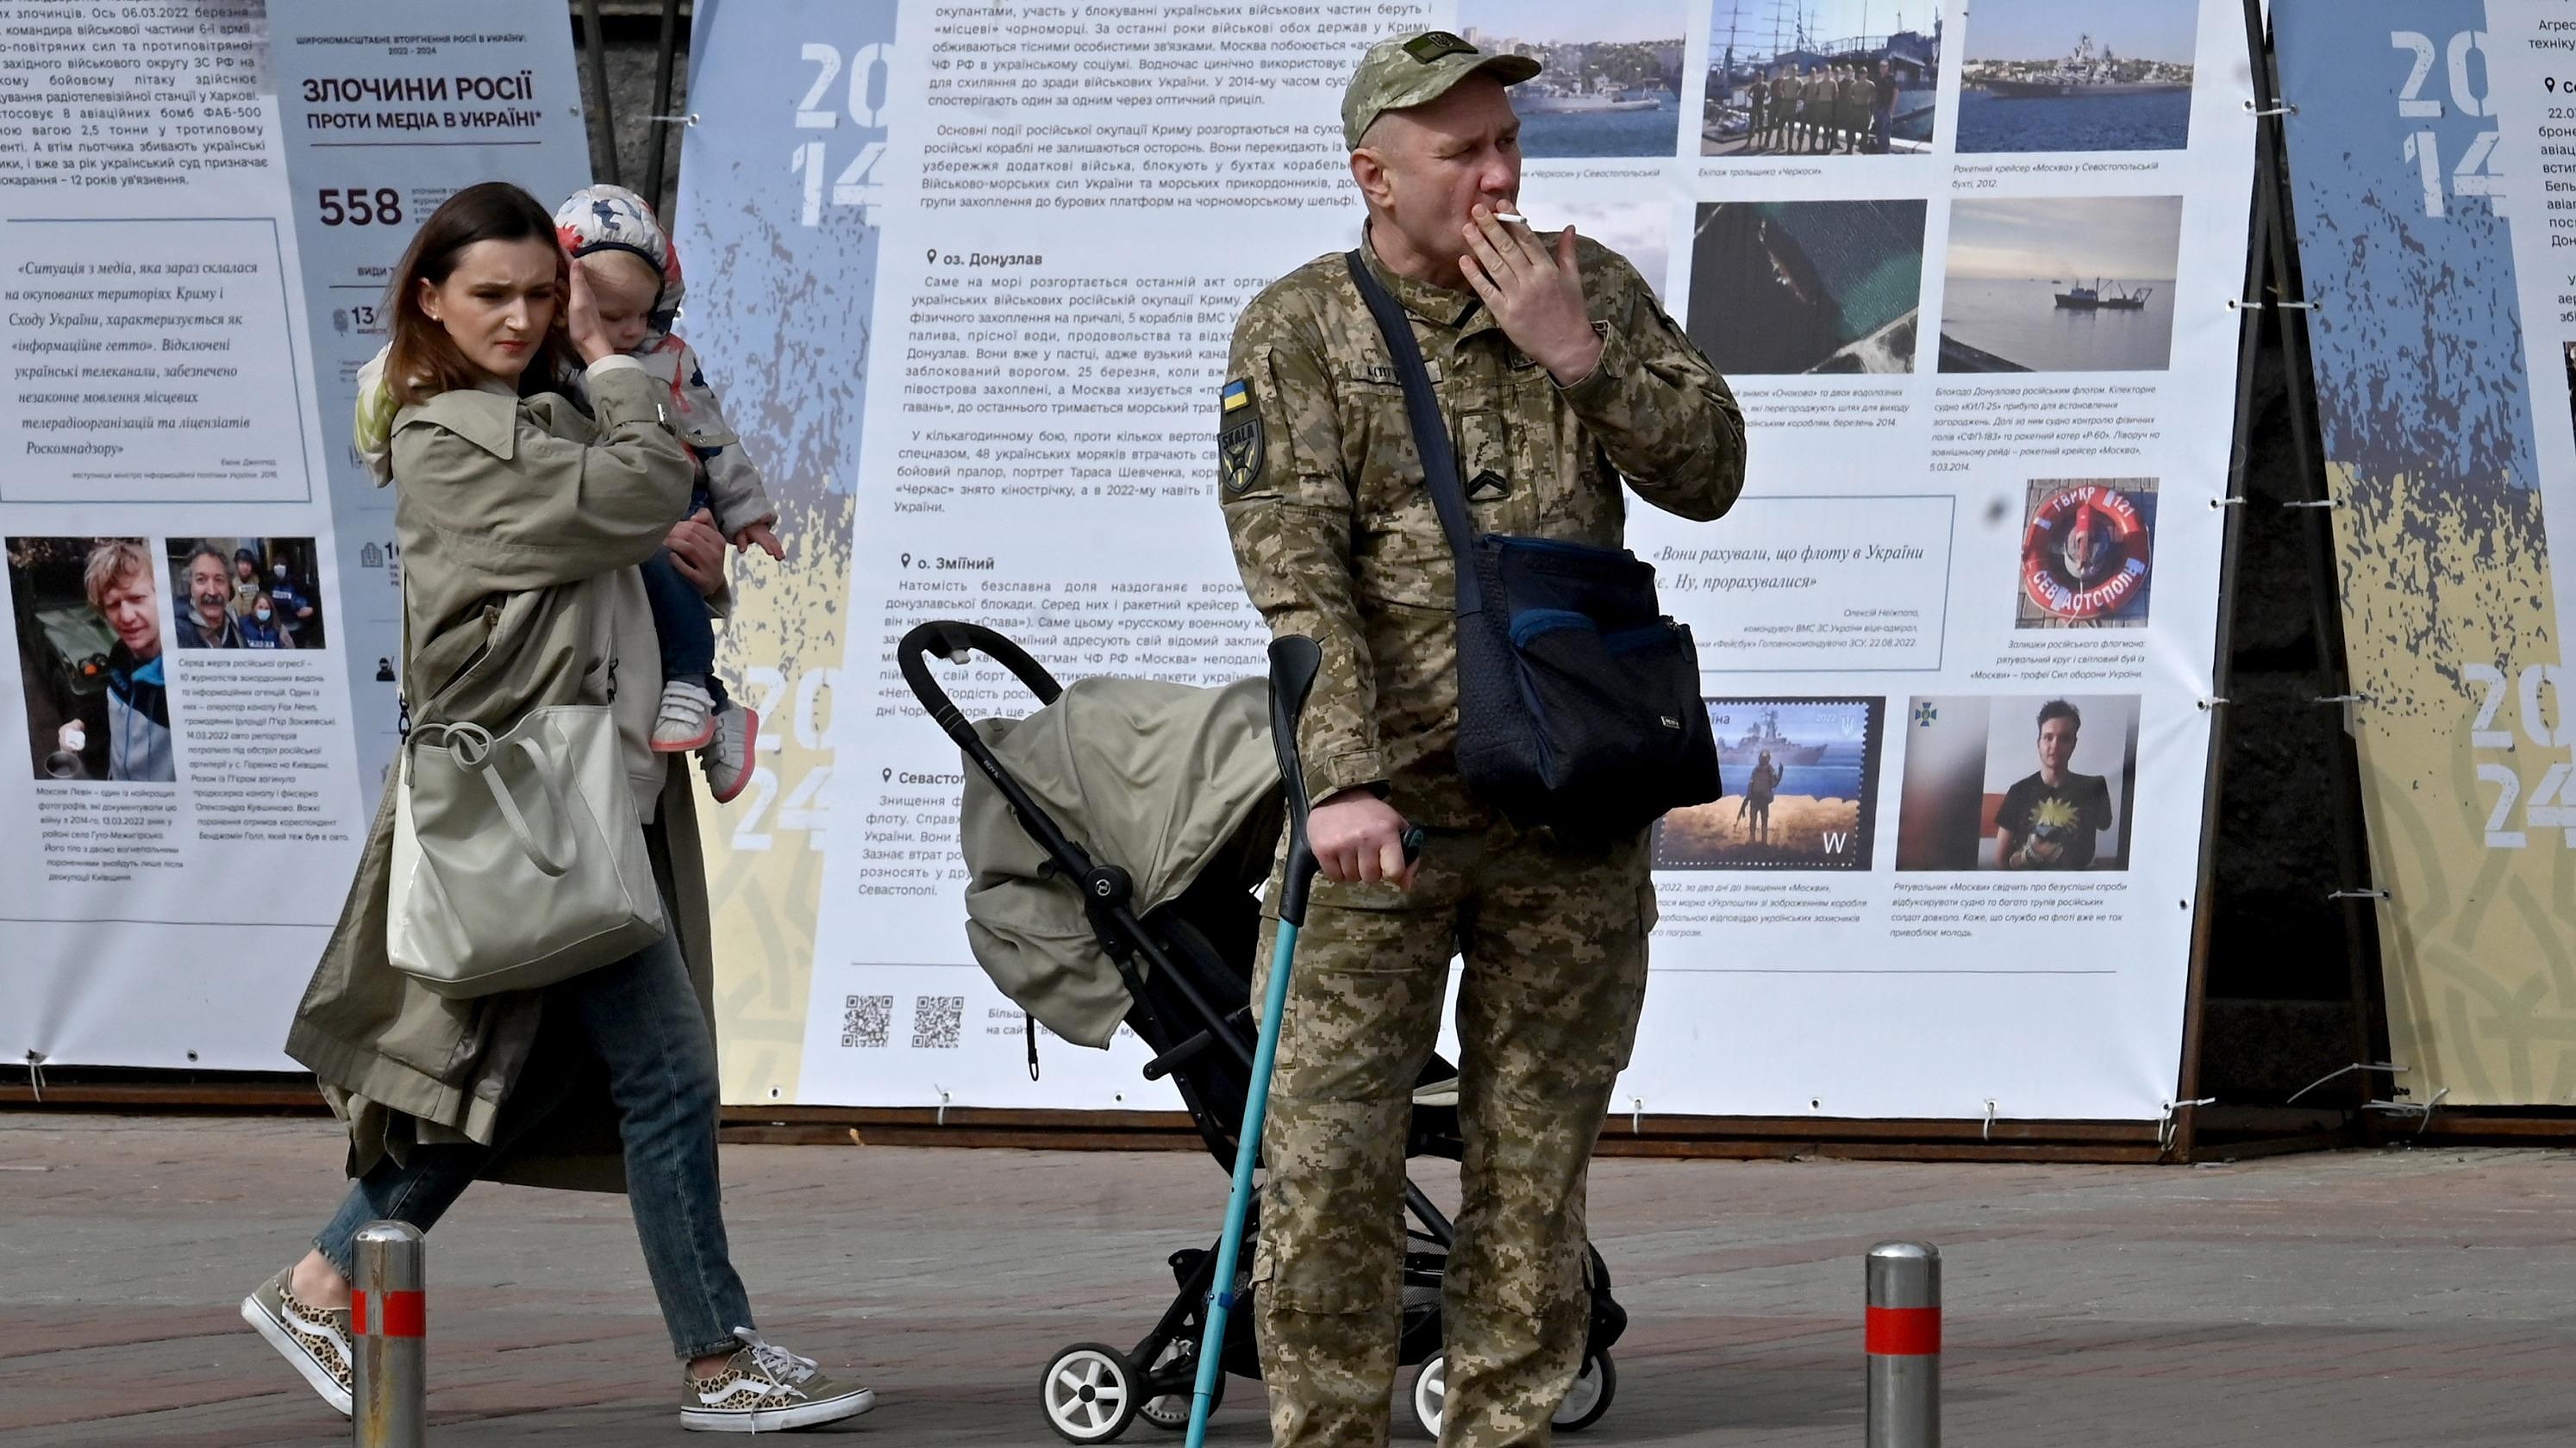 Ukraine has lost 10 million inhabitants since 2001... and could lose as many by 2050